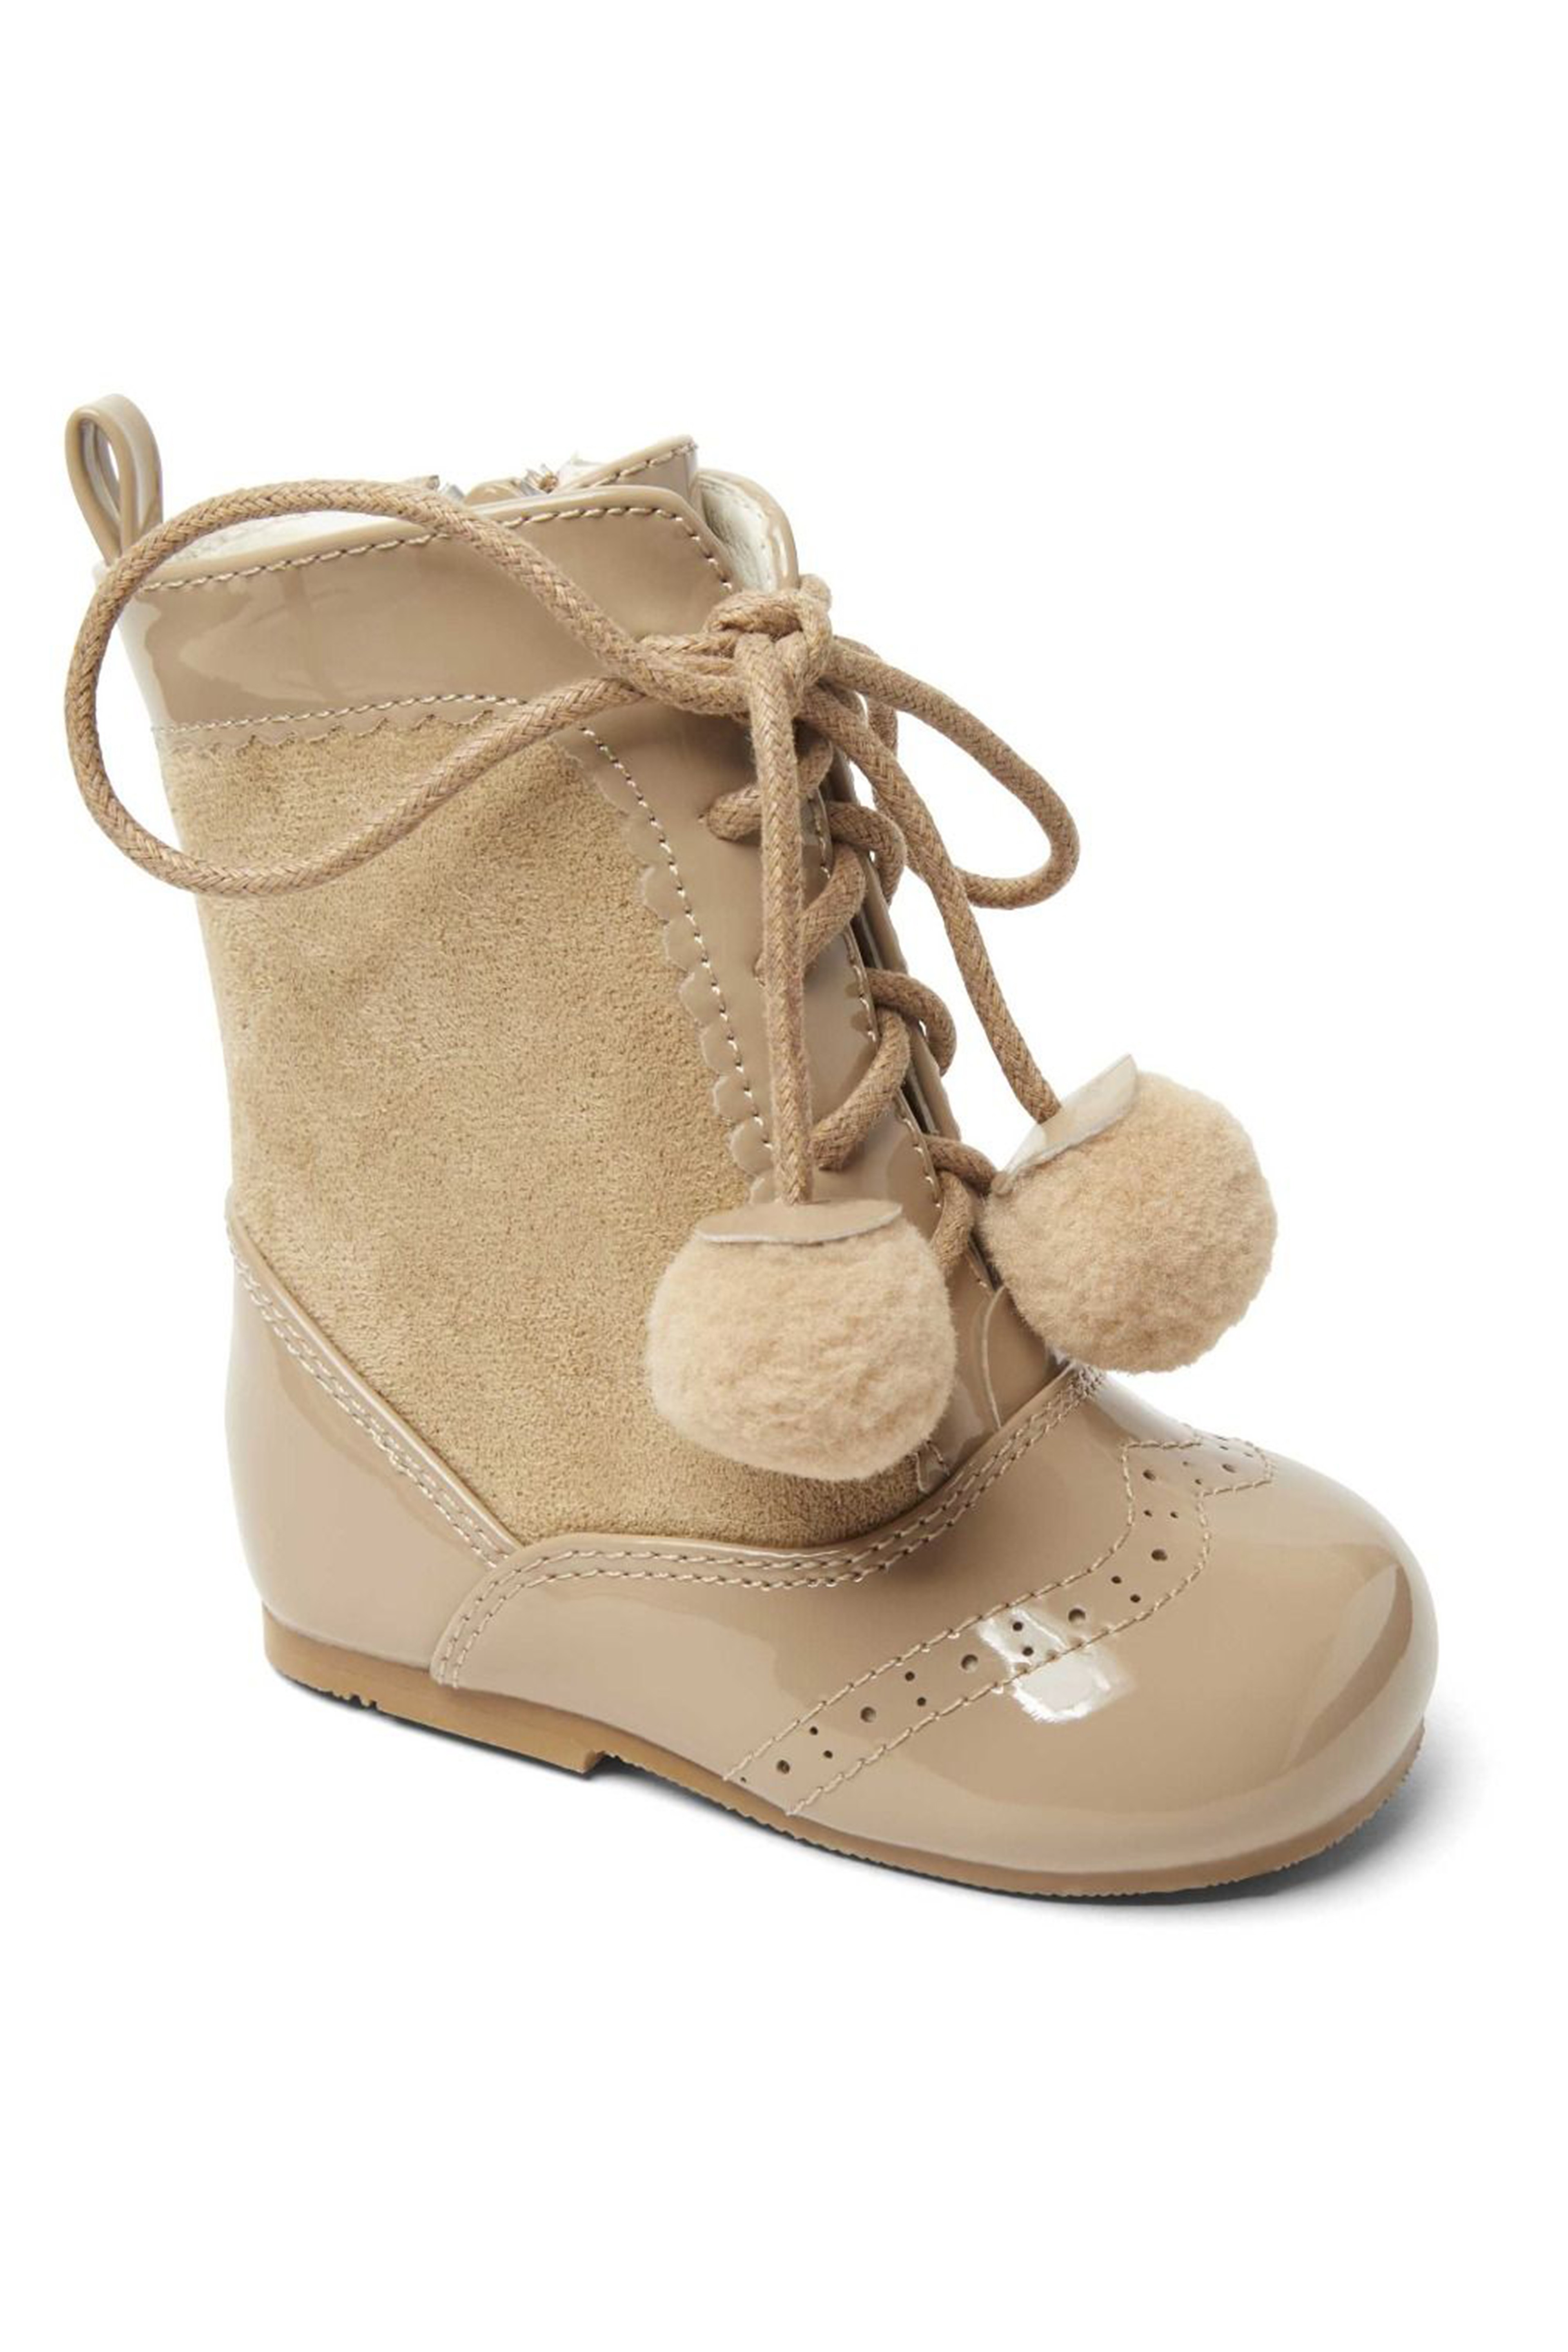 Kids Patent Leather Sienna Brogue Boots with Lace-Up and Pom-Pom Details, Unisex Classic Footwear - Camel